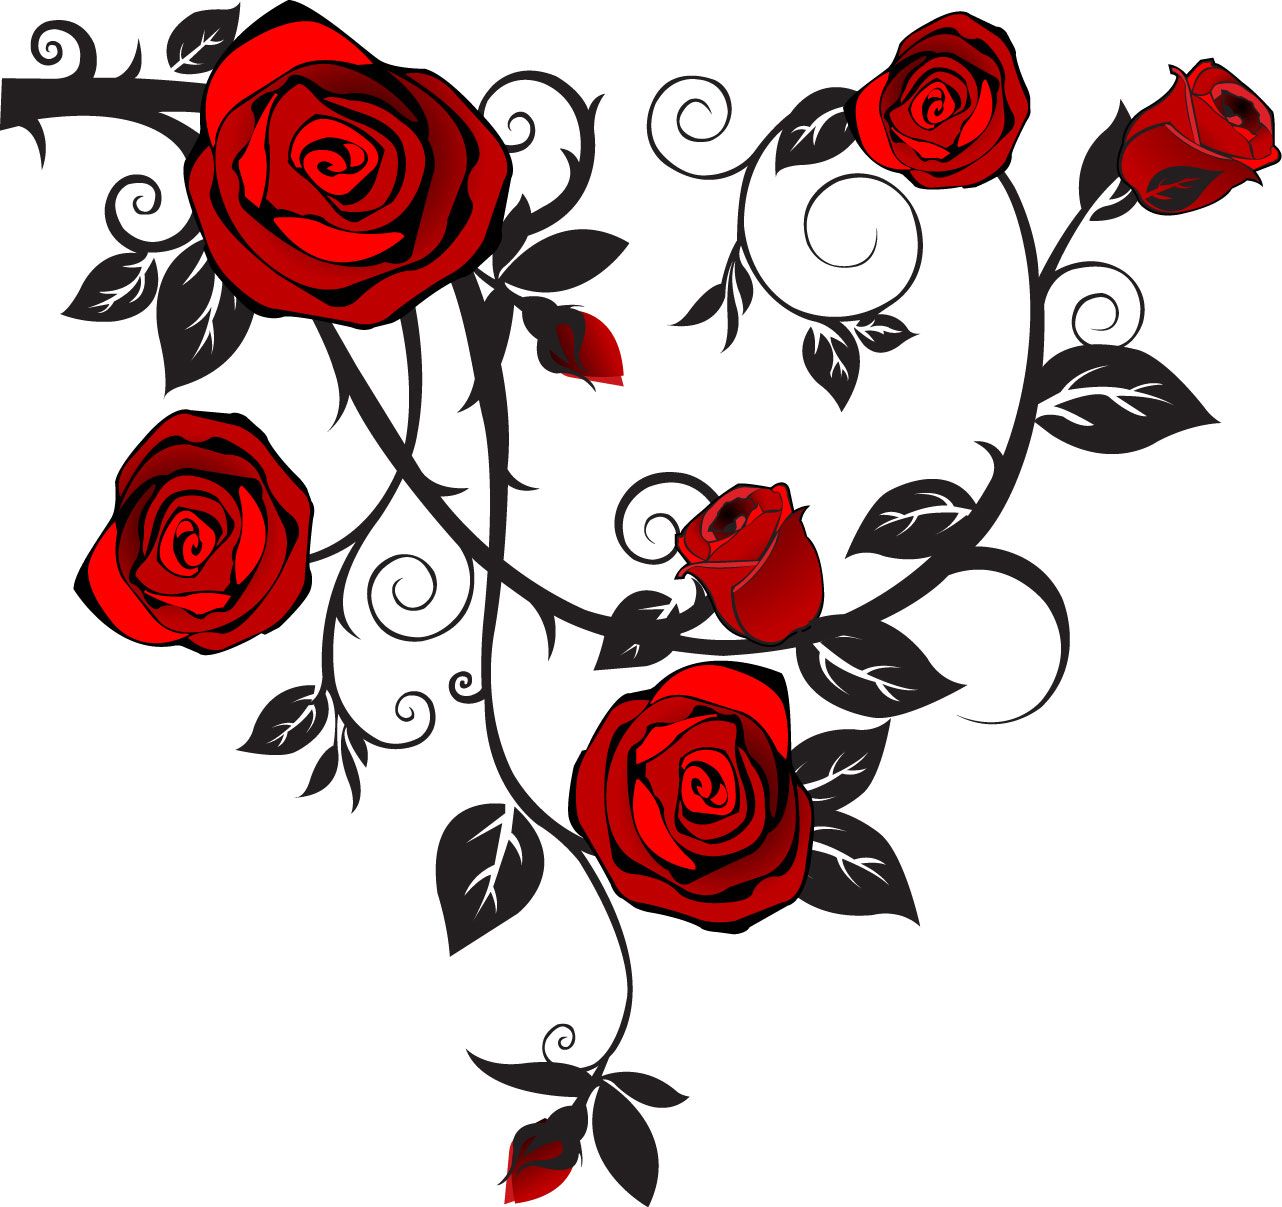 Rose image vector.